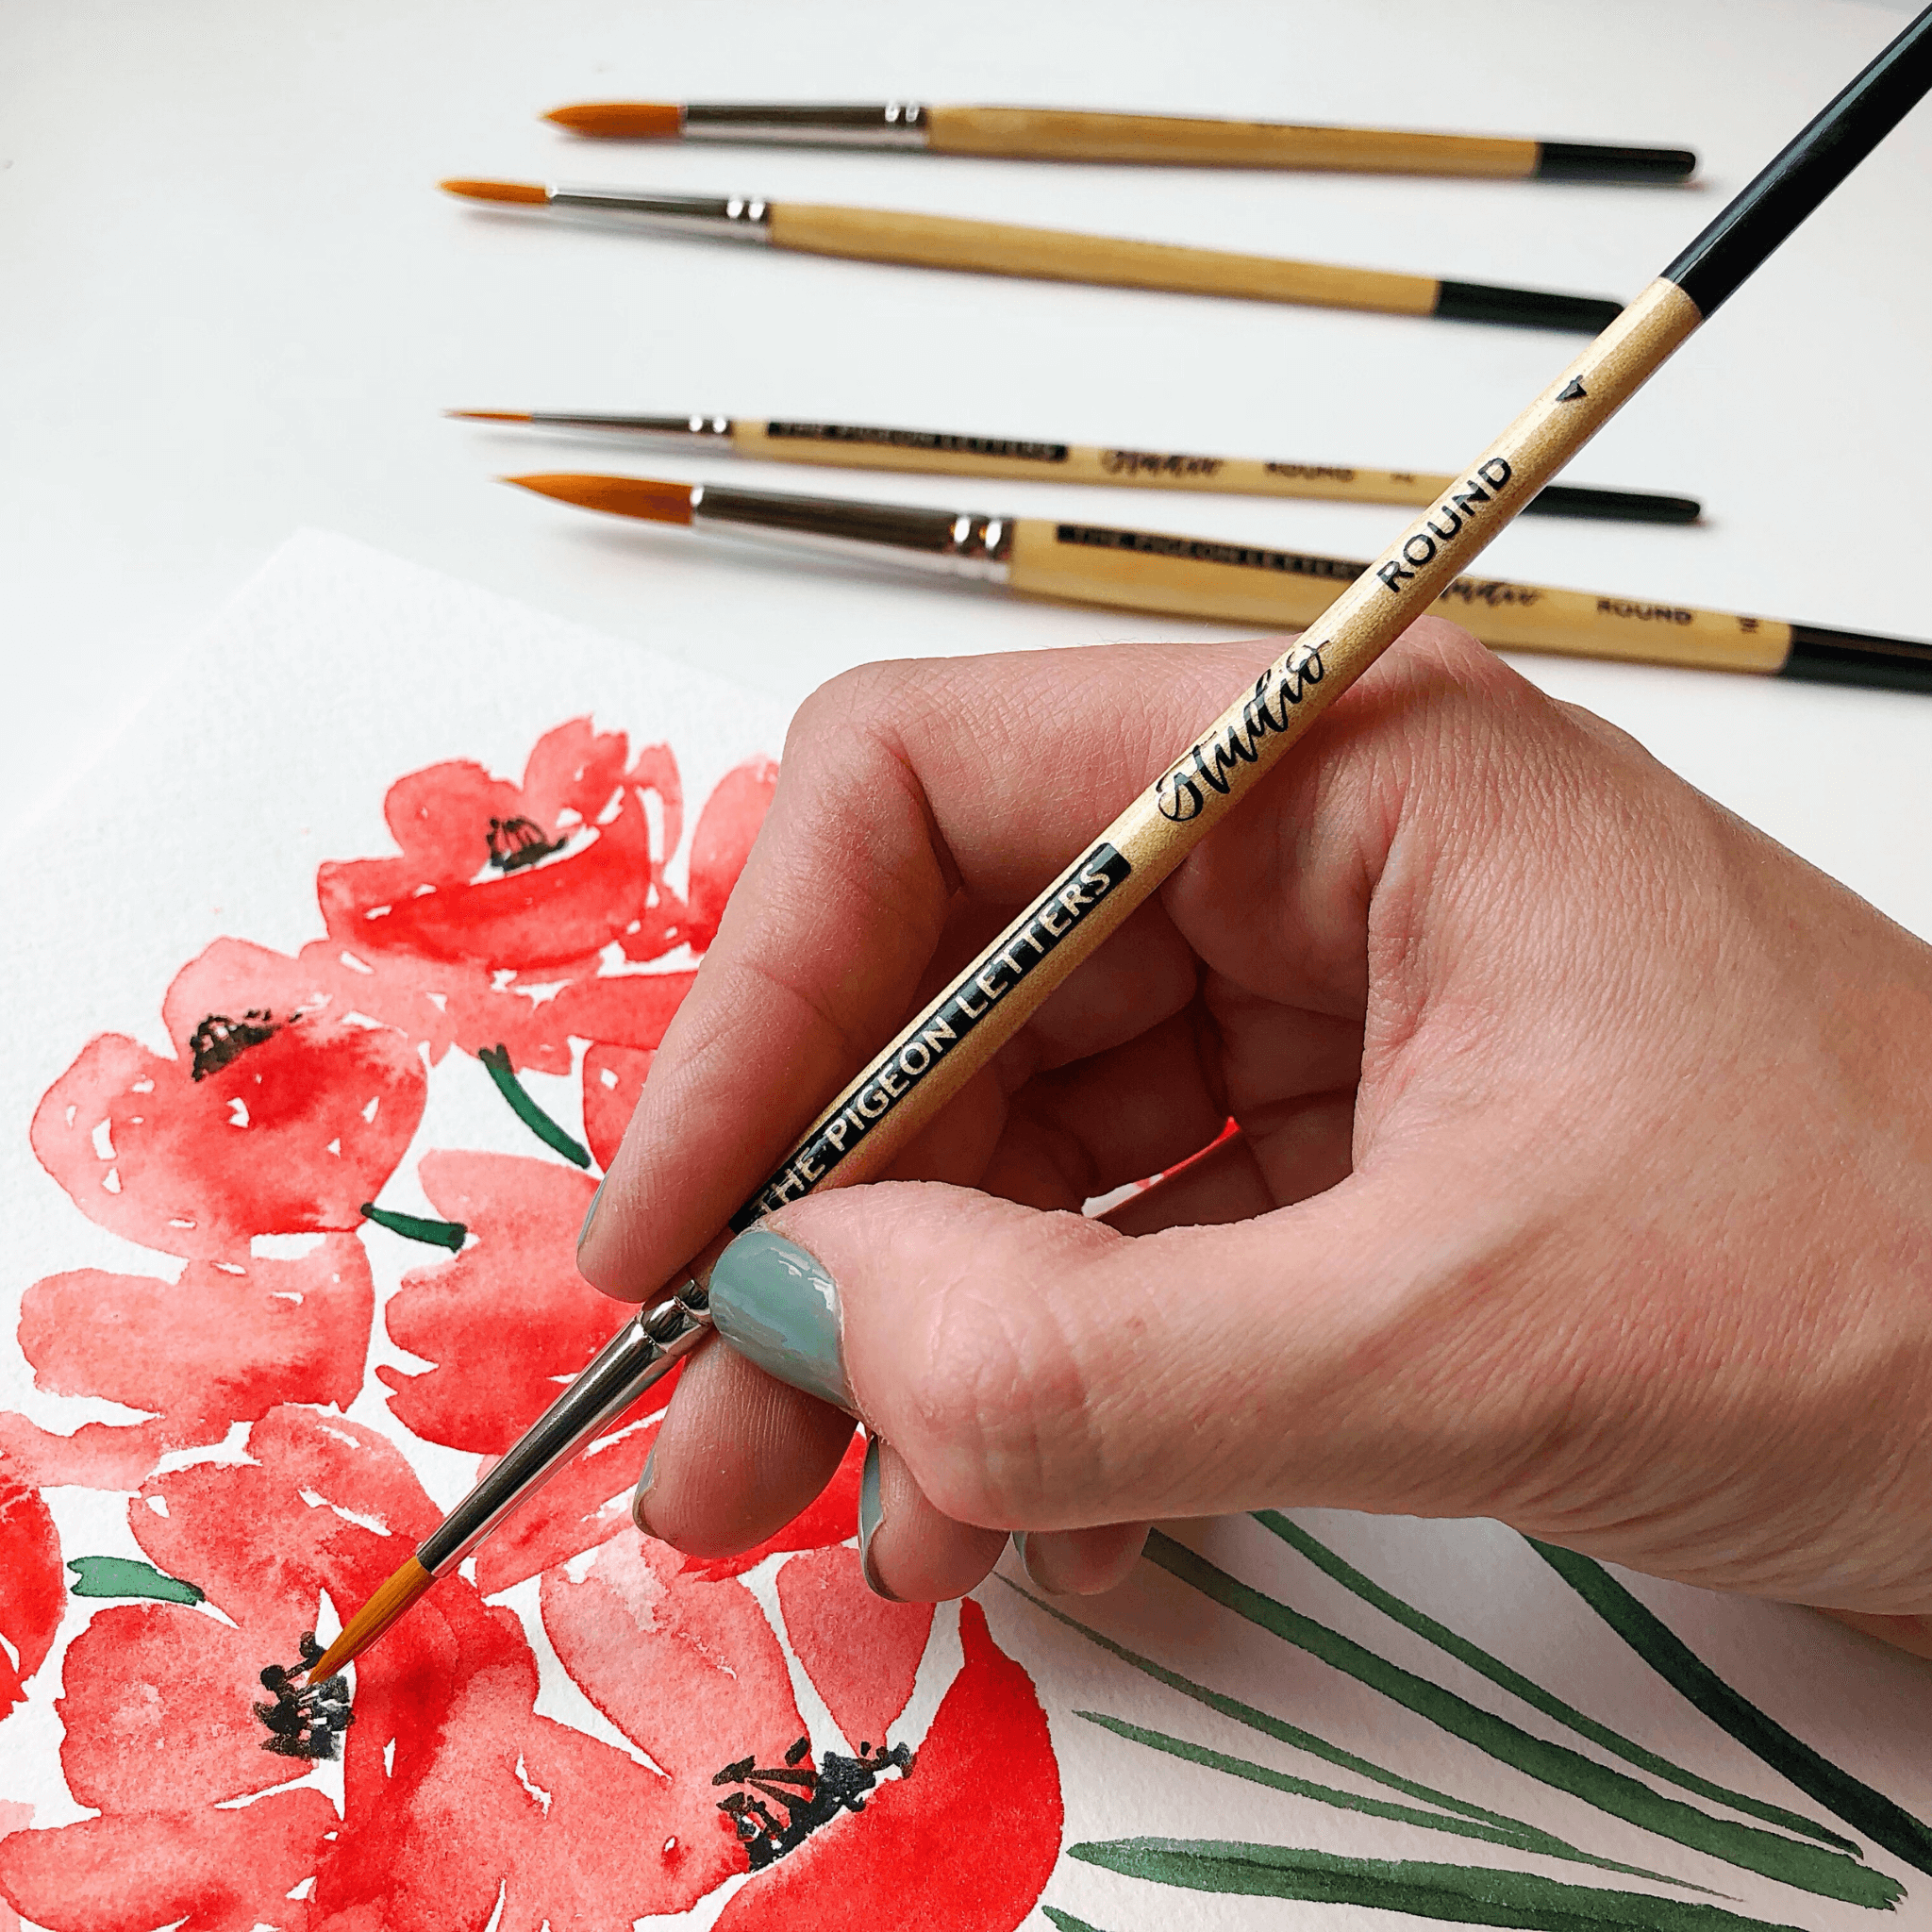 Adding details to watercolor poppy flowers